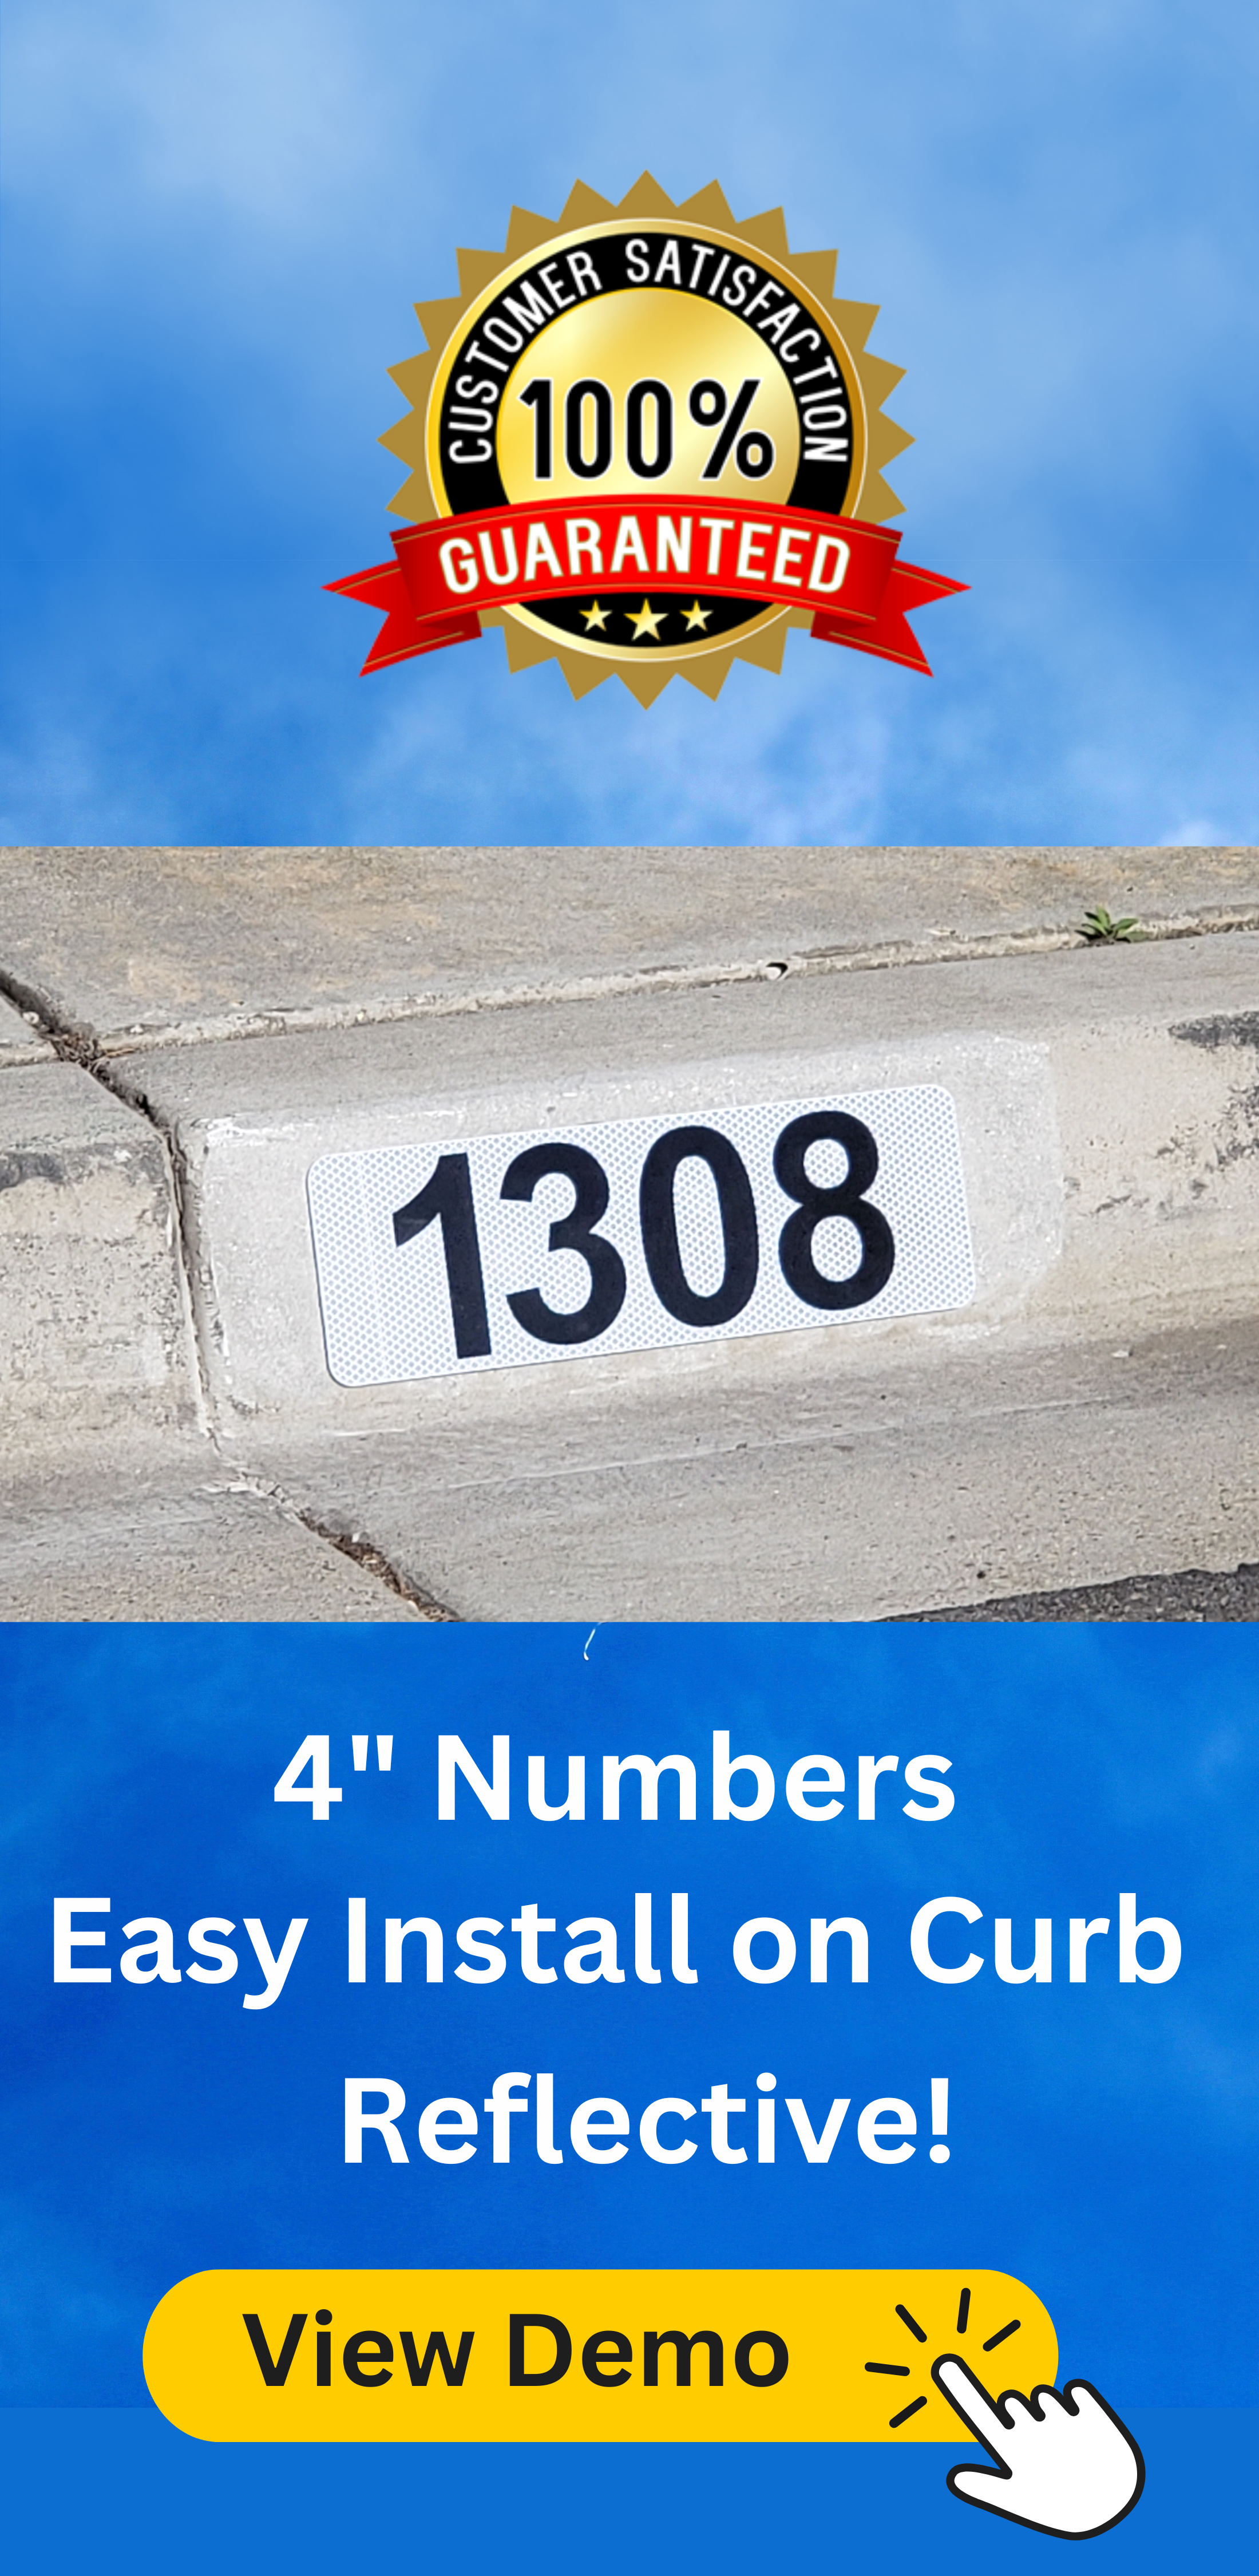 4 Numbers.Demo  - Reflective Curb Address Product Information